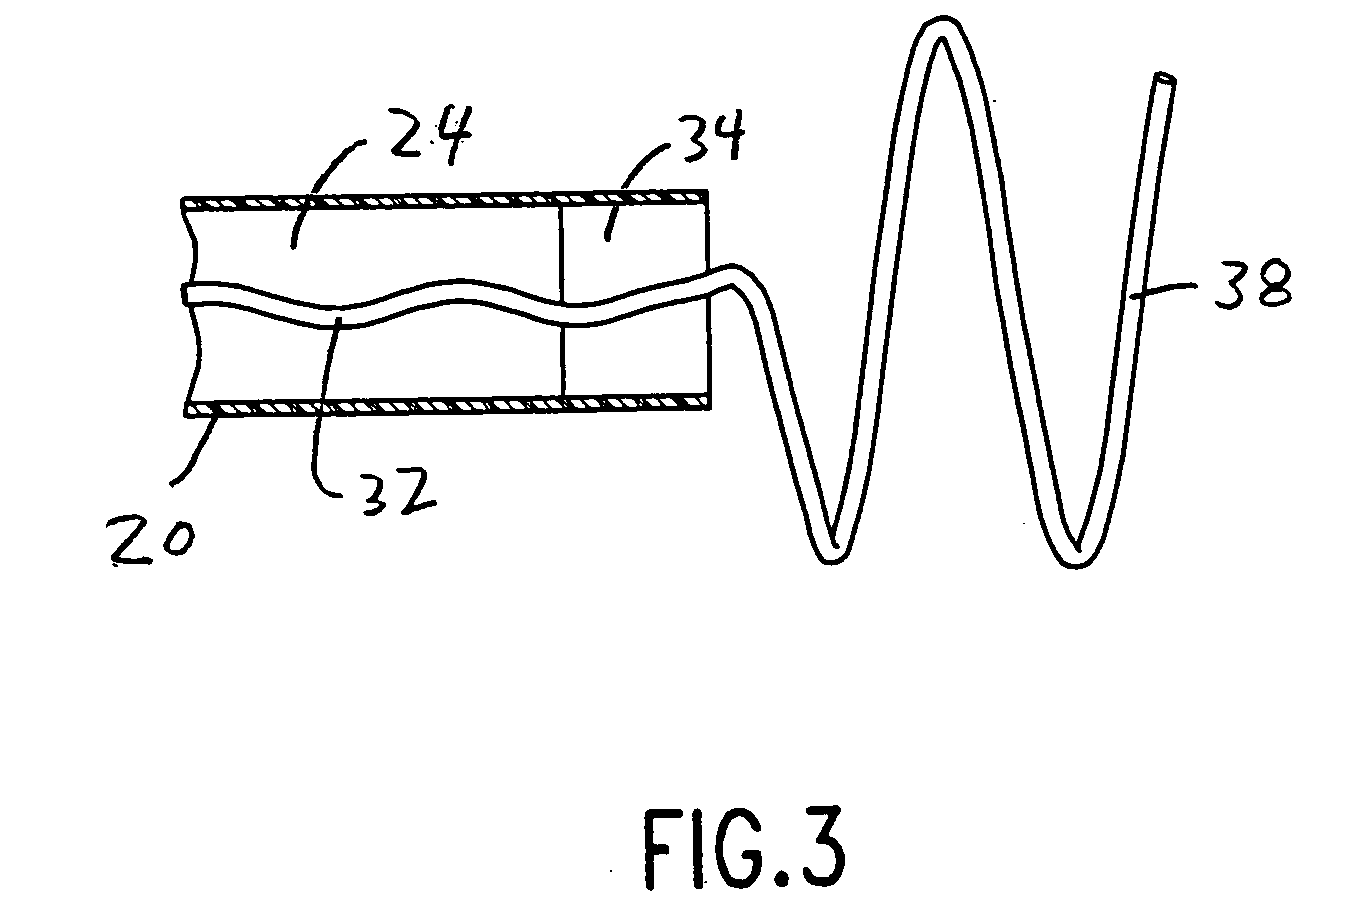 Thermal transition methods and devices